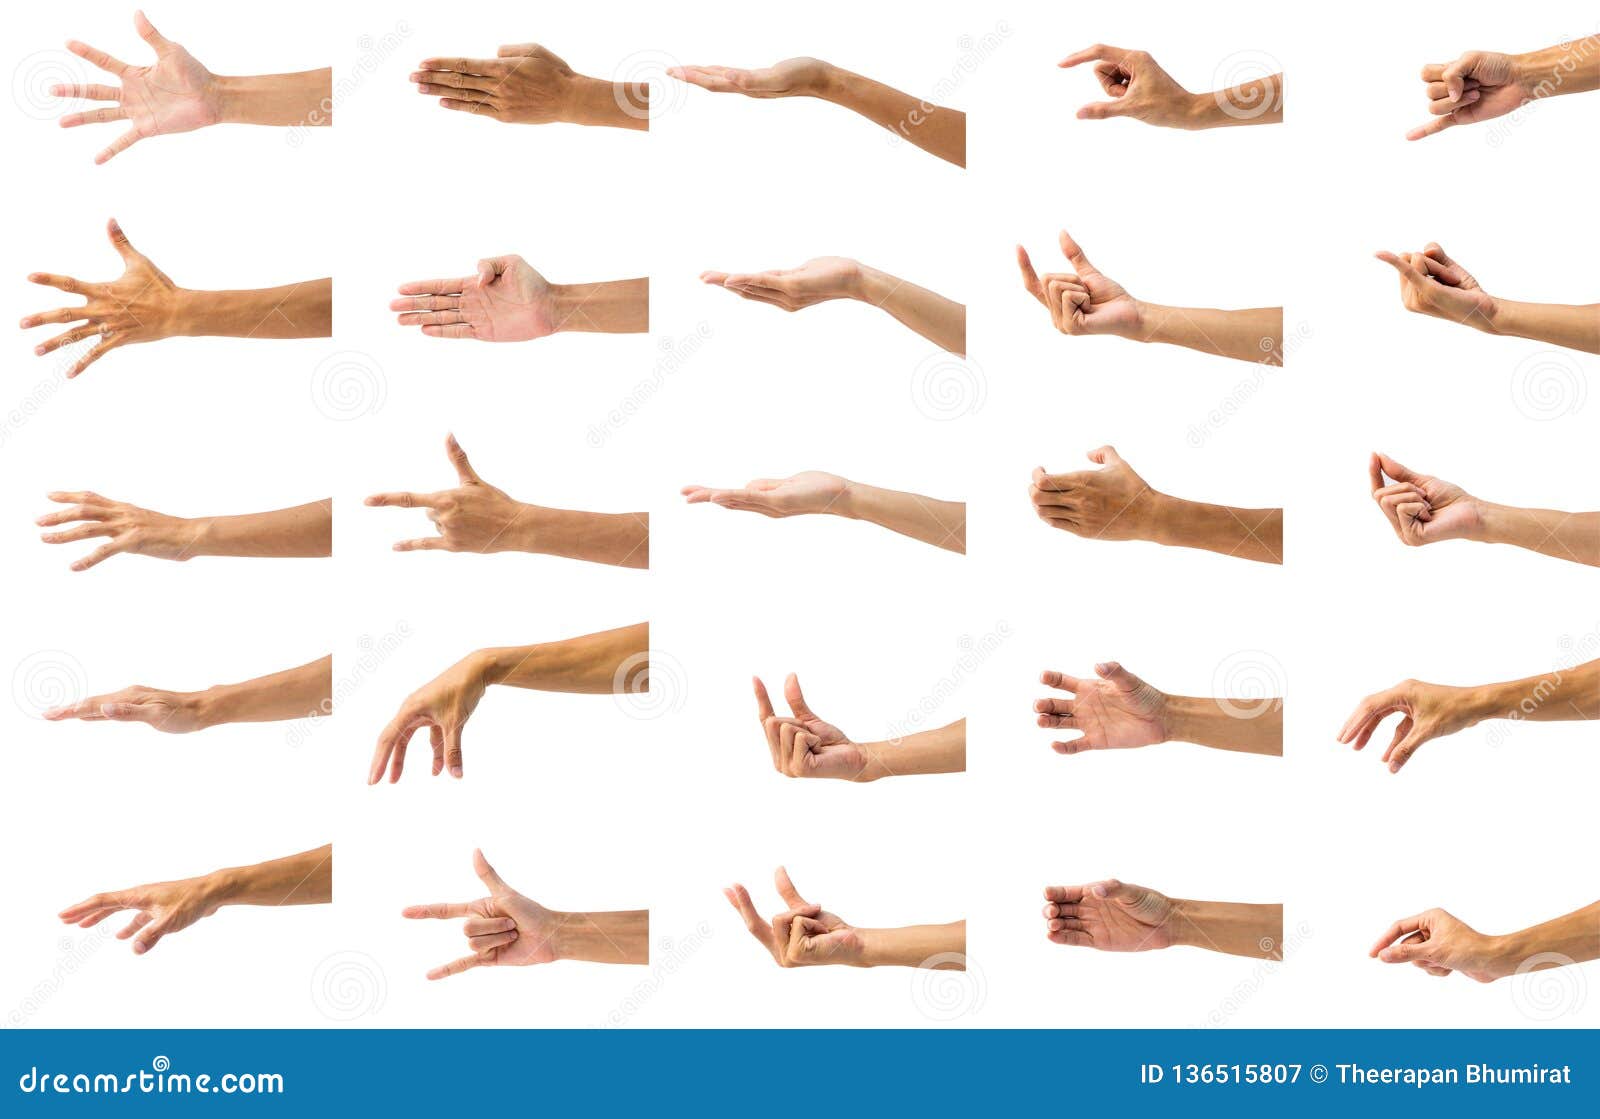 Collection Of Man`s Hand Gesture Isolated On White Background Stock